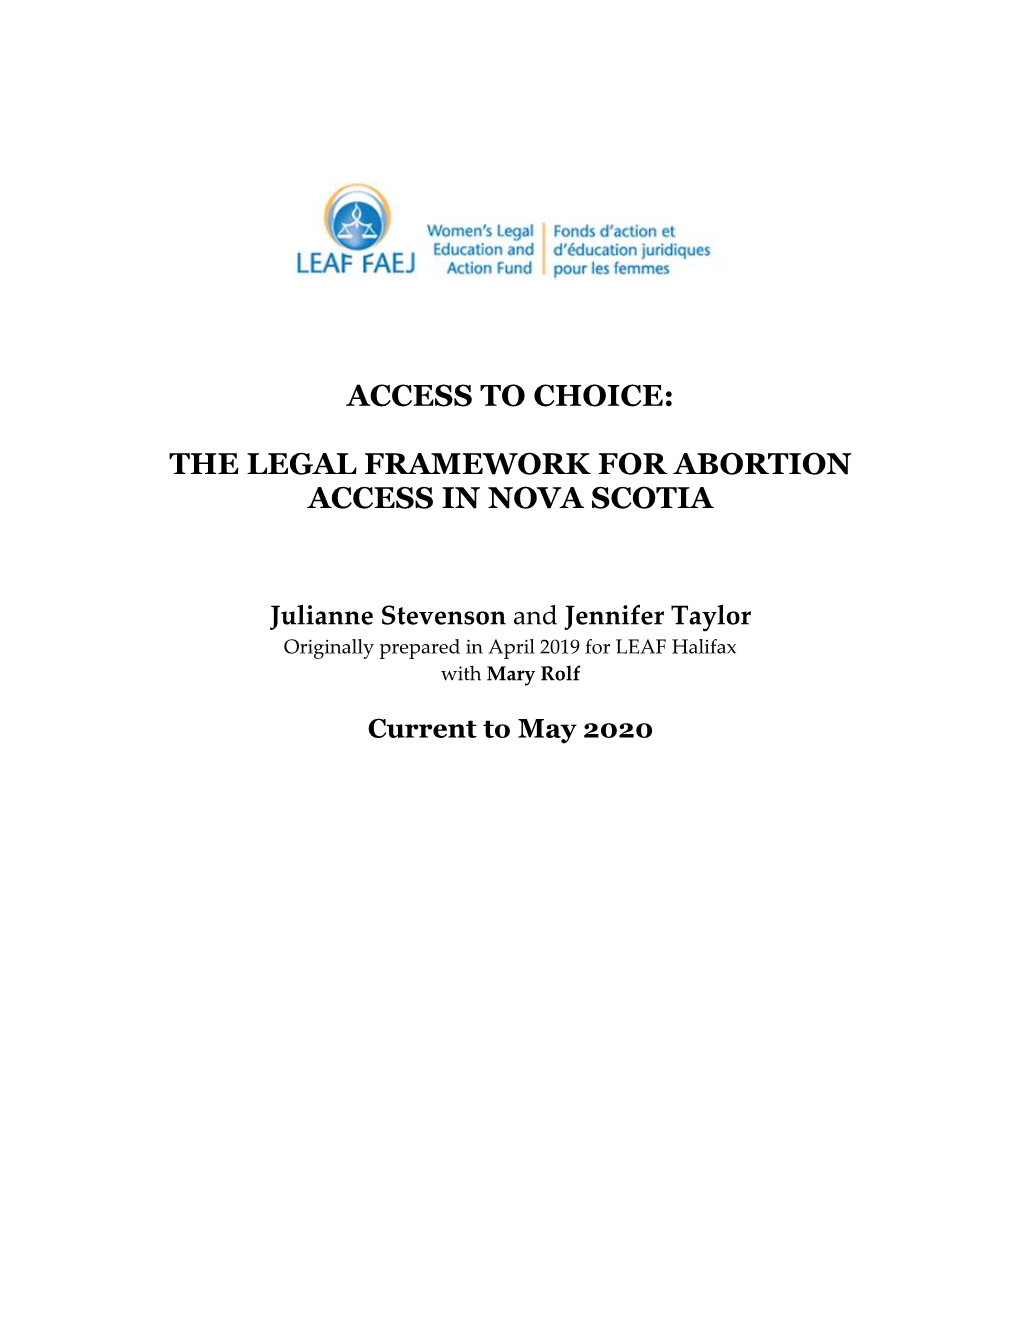 The Legal Framework for Abortion Access in Nova Scotia